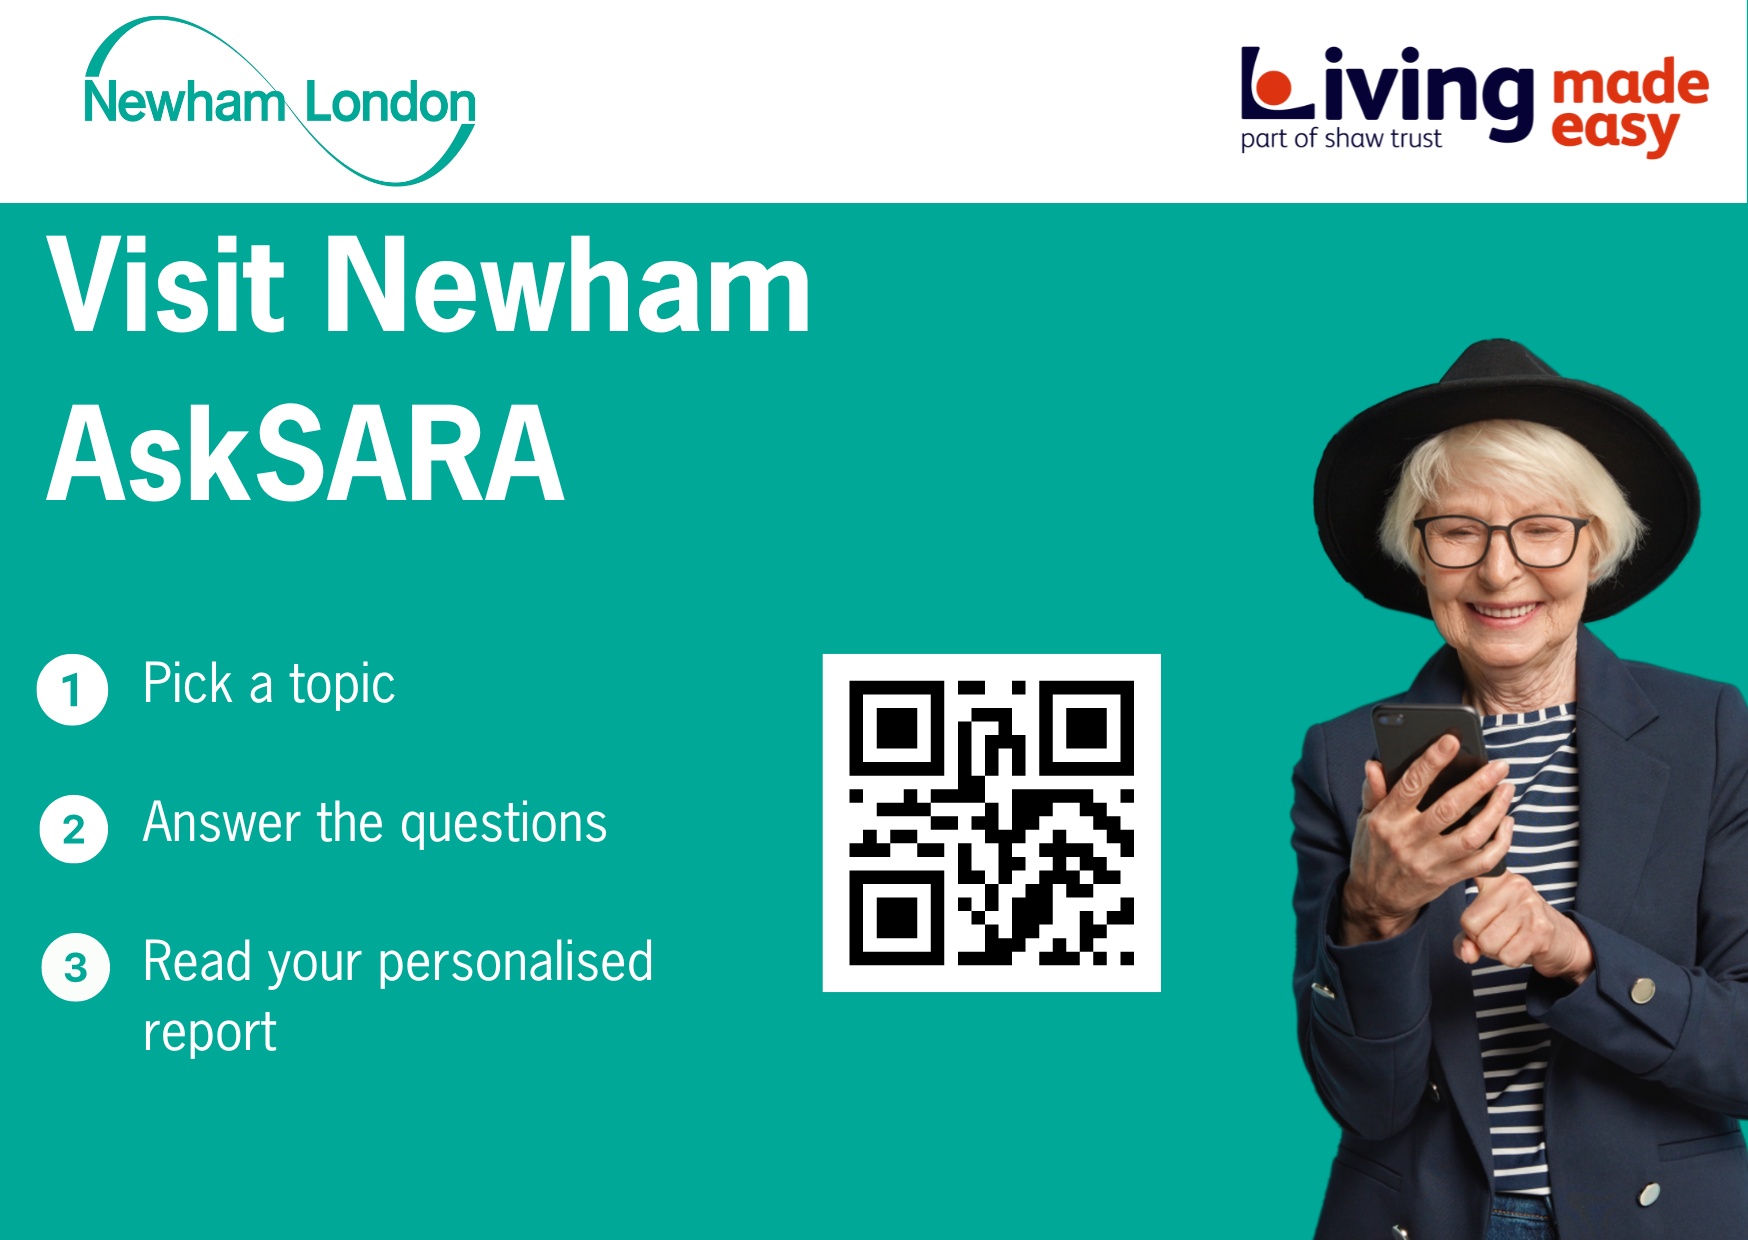 A turquoise image of a postcard with the words Visit Newham AskSARA, 1 Pick a topic, 2 Answer the questions, 3 read your personalised report. There is an image of an older women with a black hat on, glasses and a striped T-shirt. She is looking down at her mobile phone. On the postcard is also a QR code and Newham and Living Made Easy's logos.